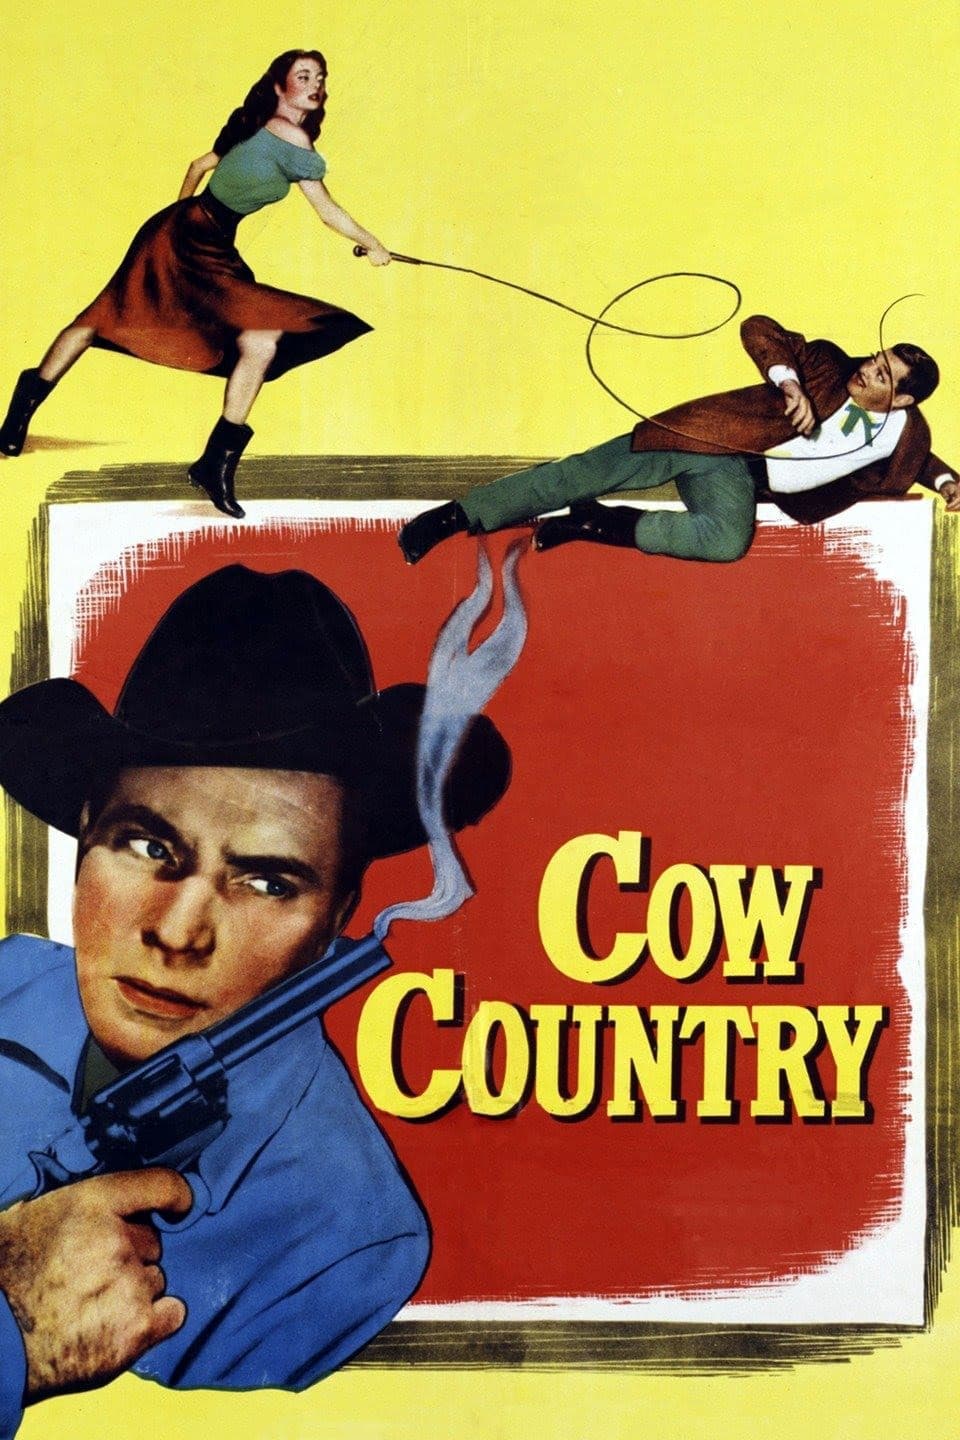 Cow Country